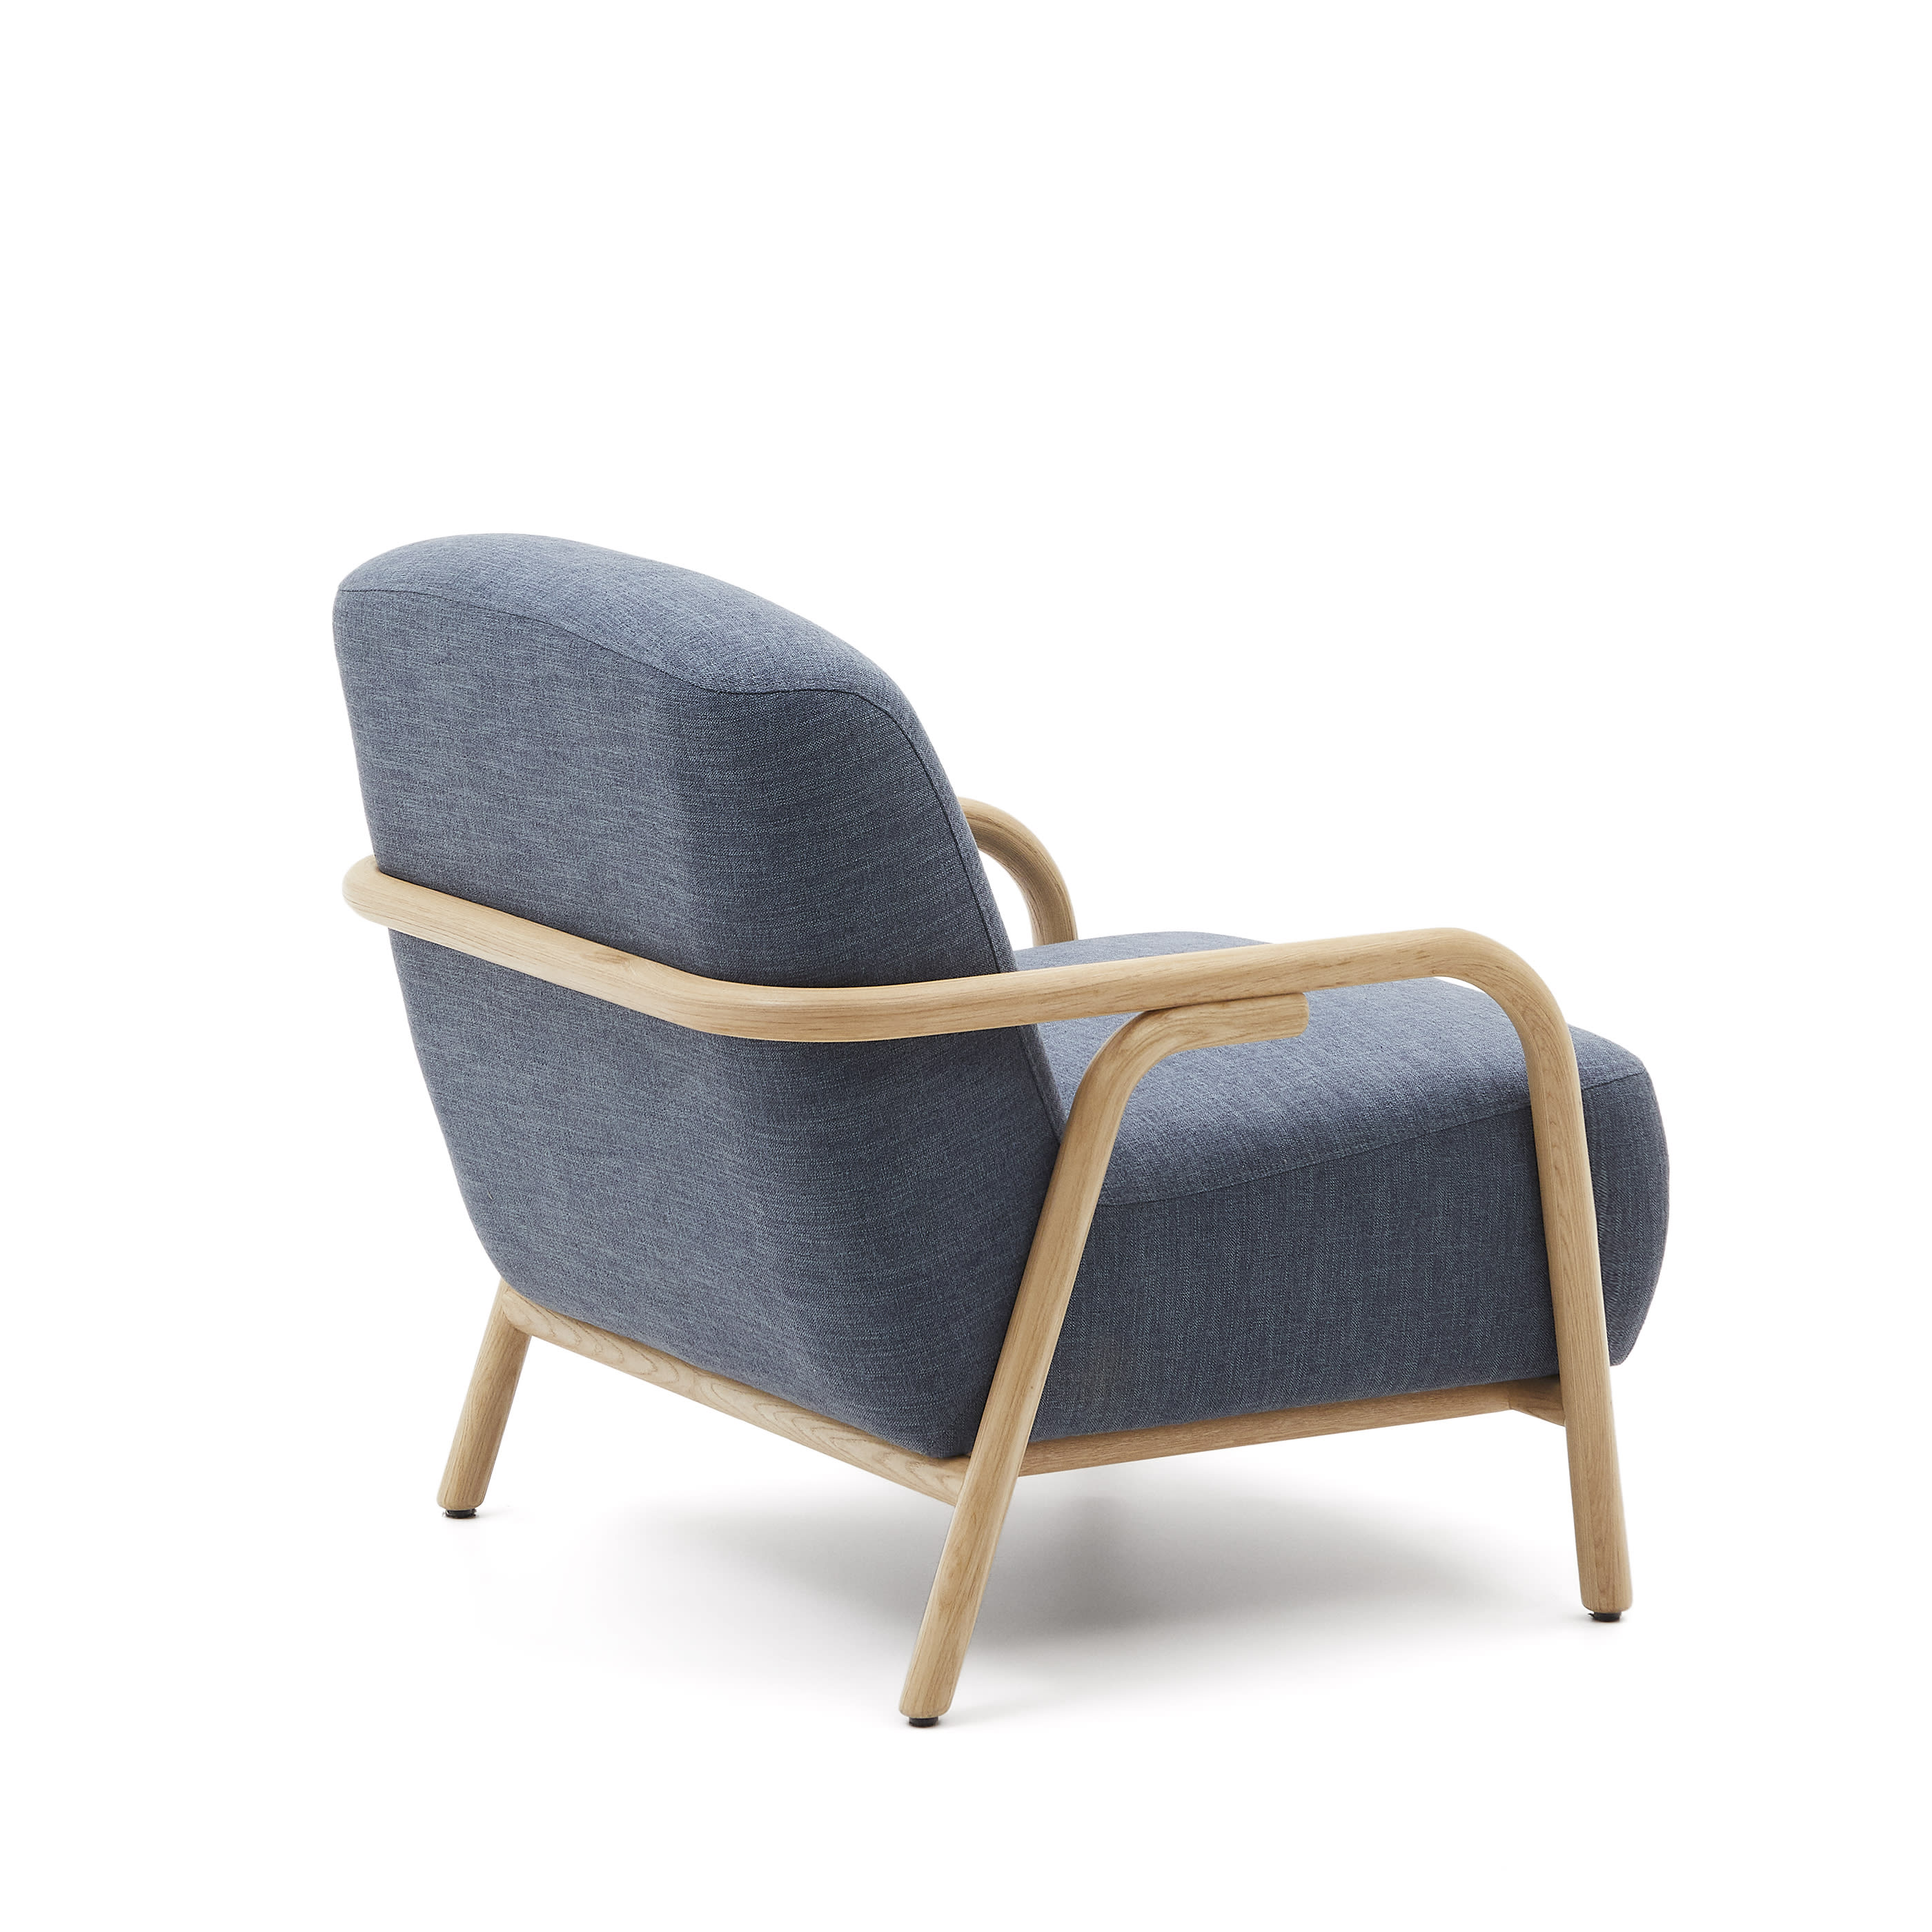 Sylo blue armchair, made of solid ash wood, 100% FSC